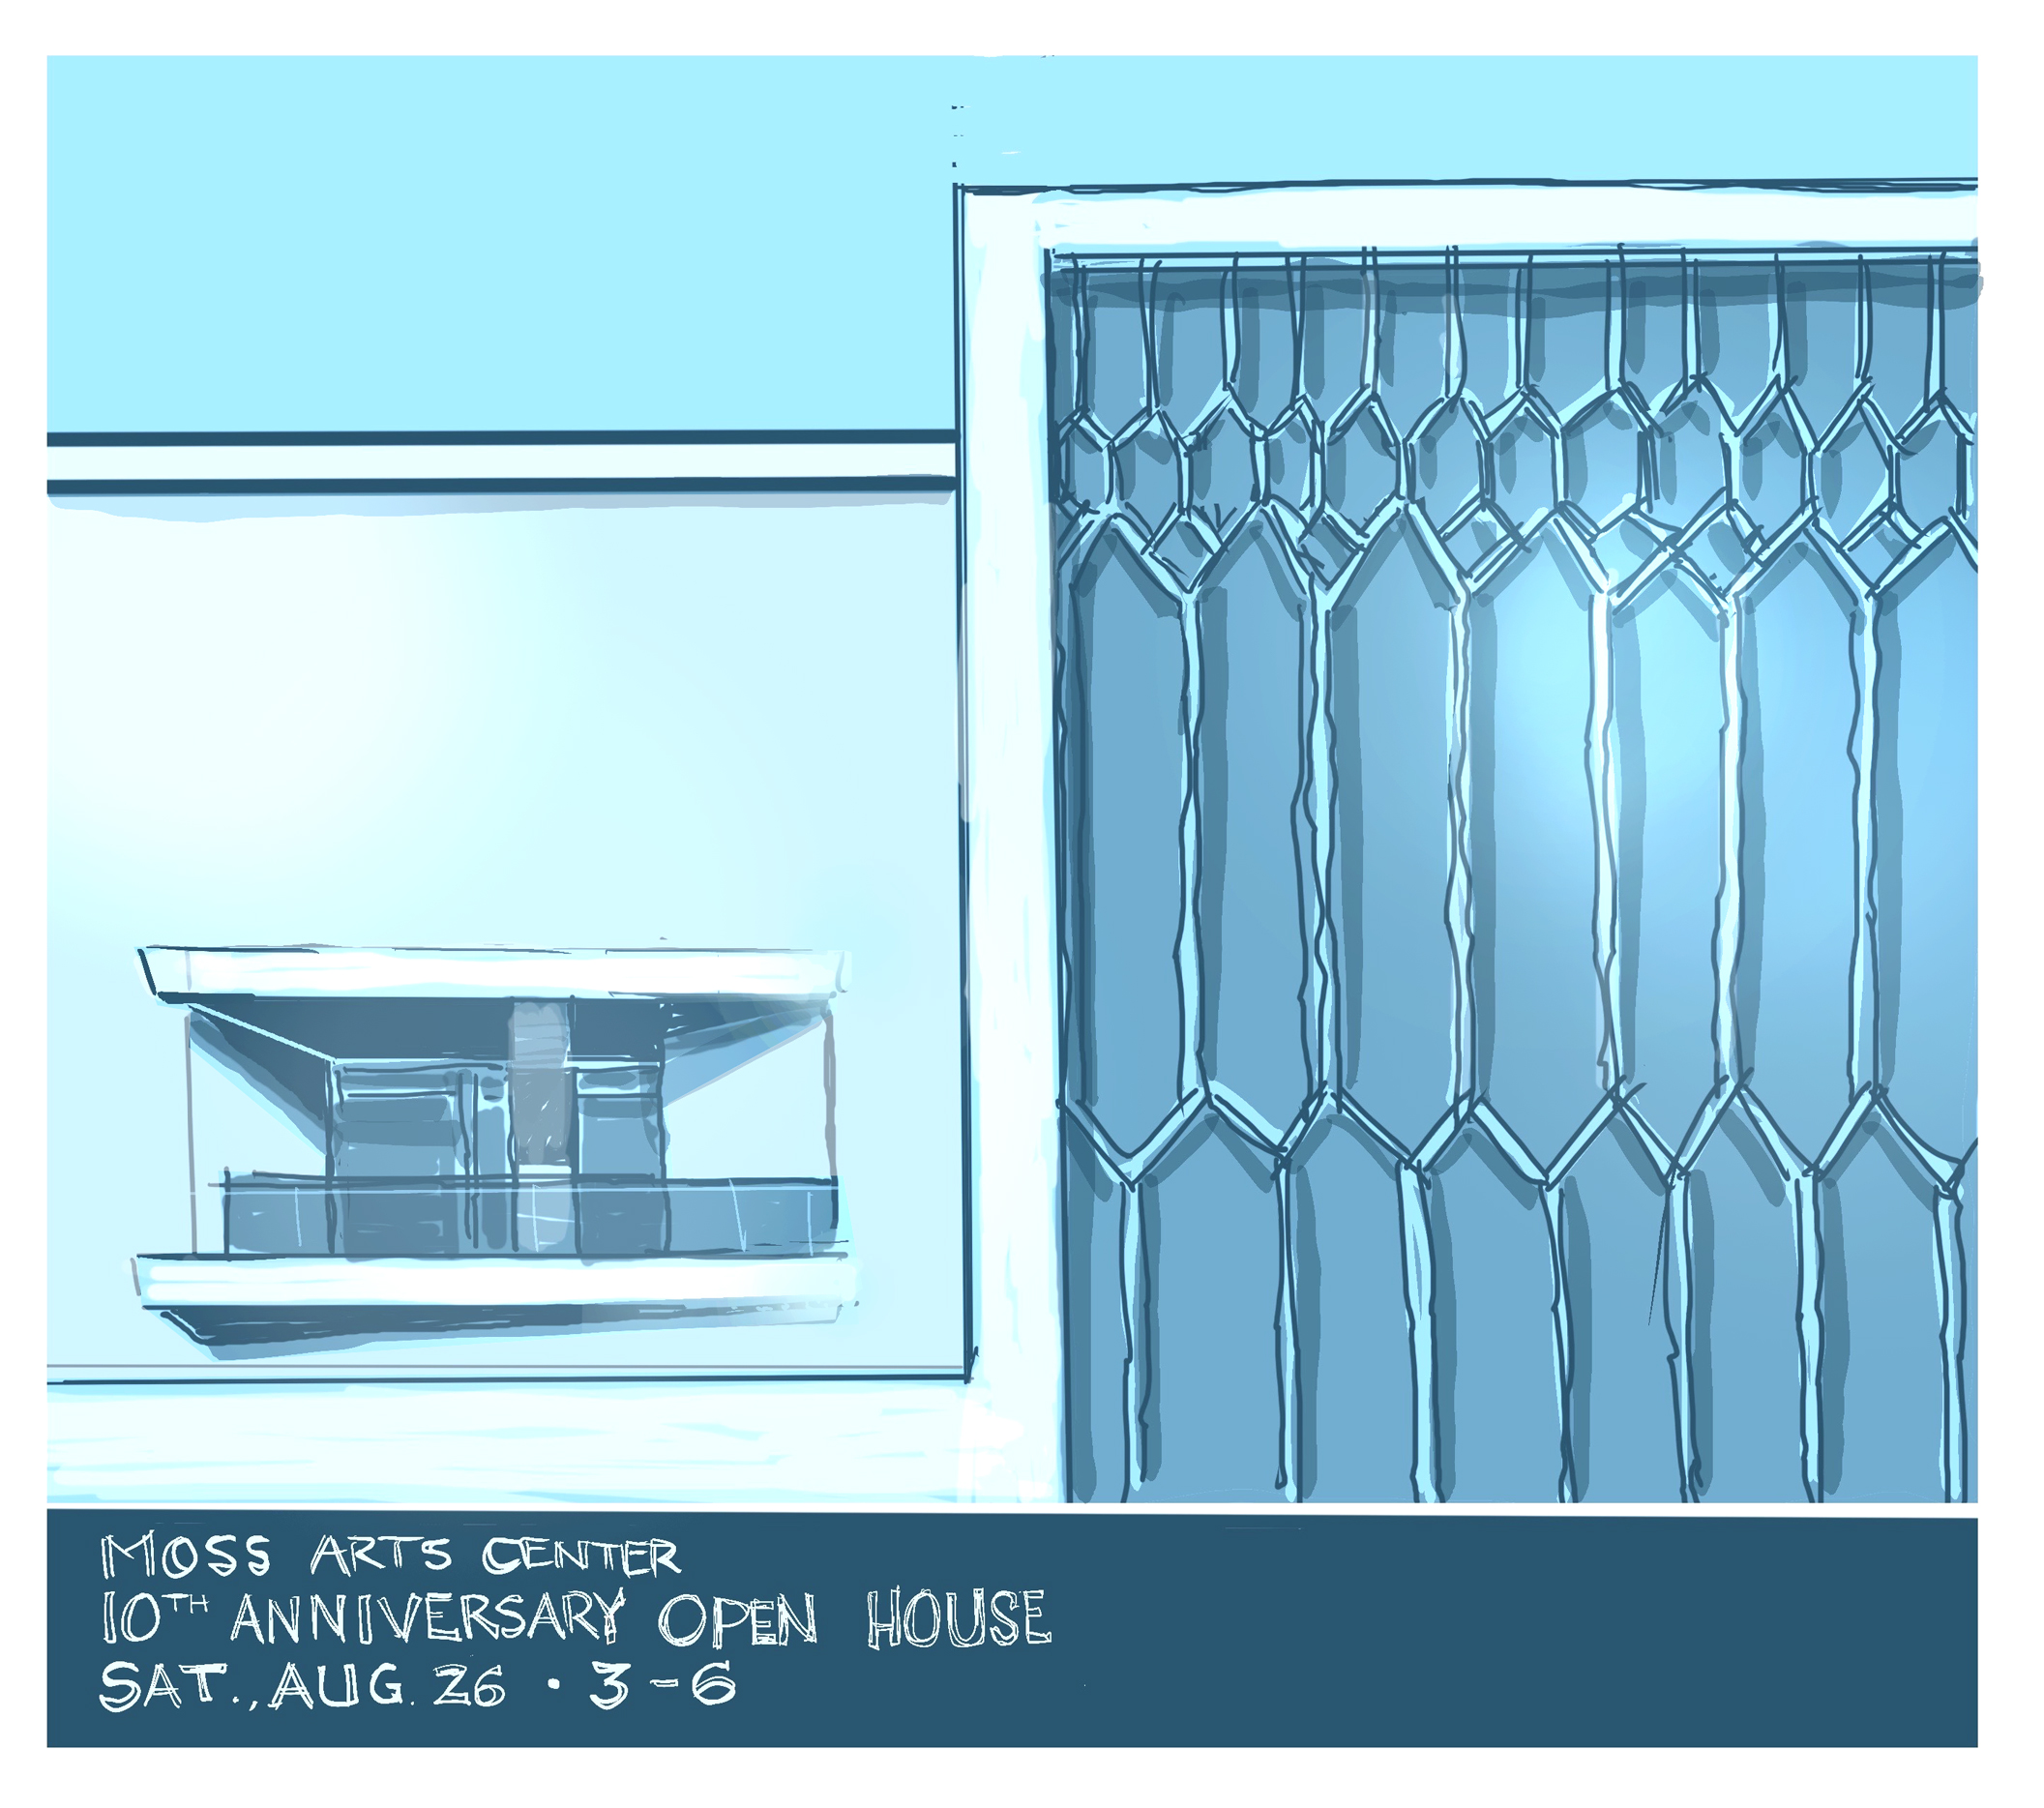 digital sketch of the exterior of the Moss Arts Center exterior promoting the 10th anniversary open house